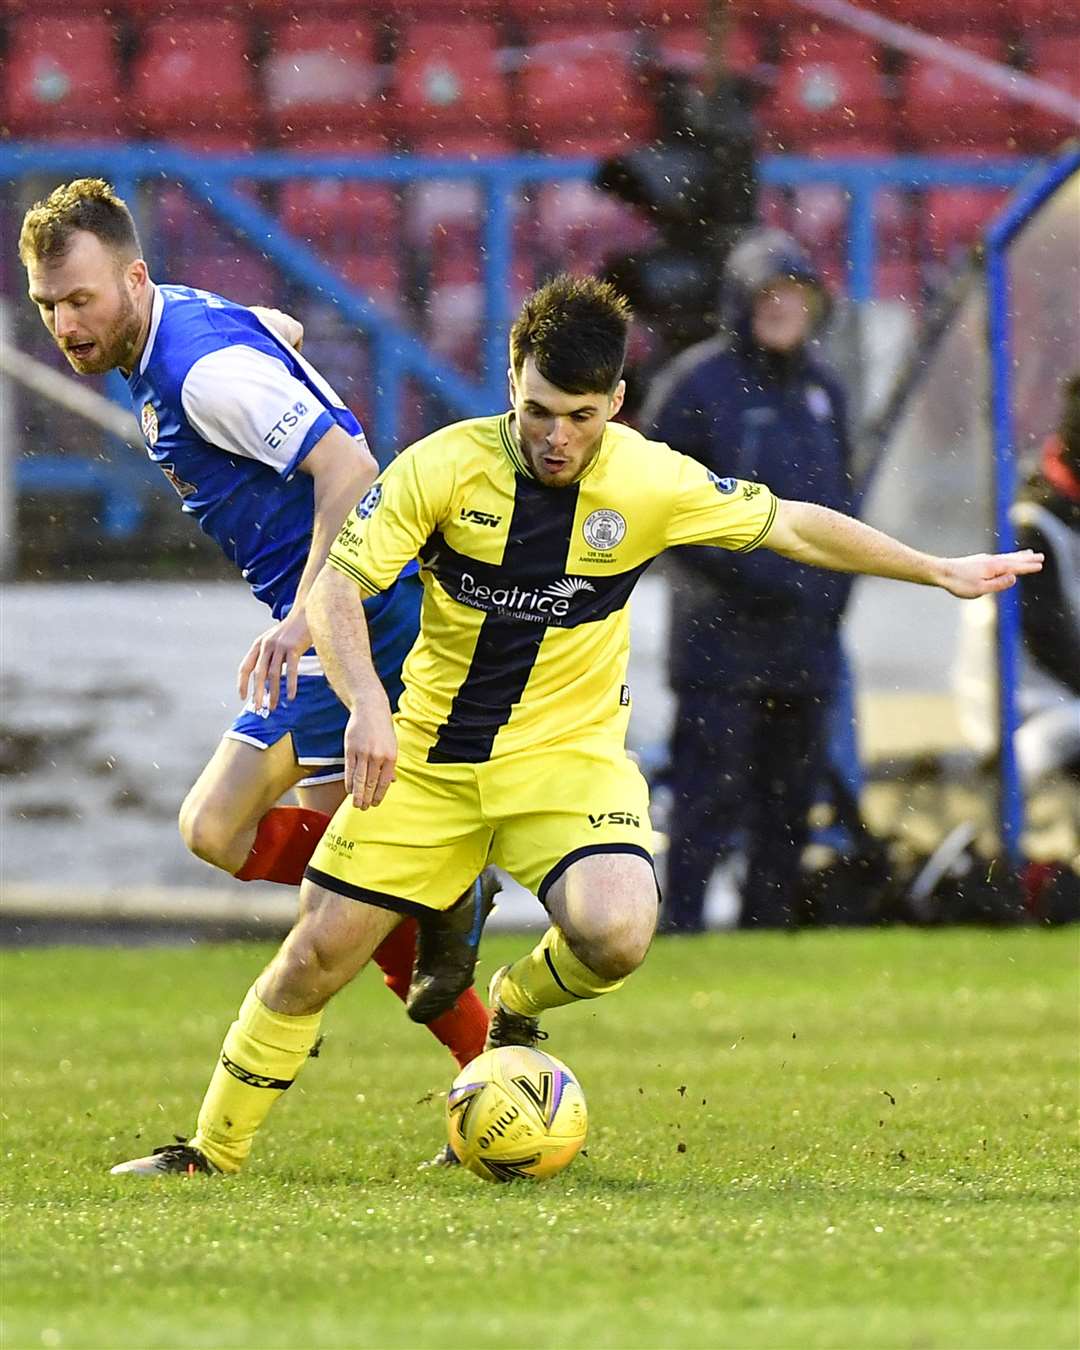 Sean Campbell of Wick Academy gets away from Cowdenbeath's Kyle Miller during the Scottish Cup clash at Central Park on Boxing Day. Picture: Mel Roger